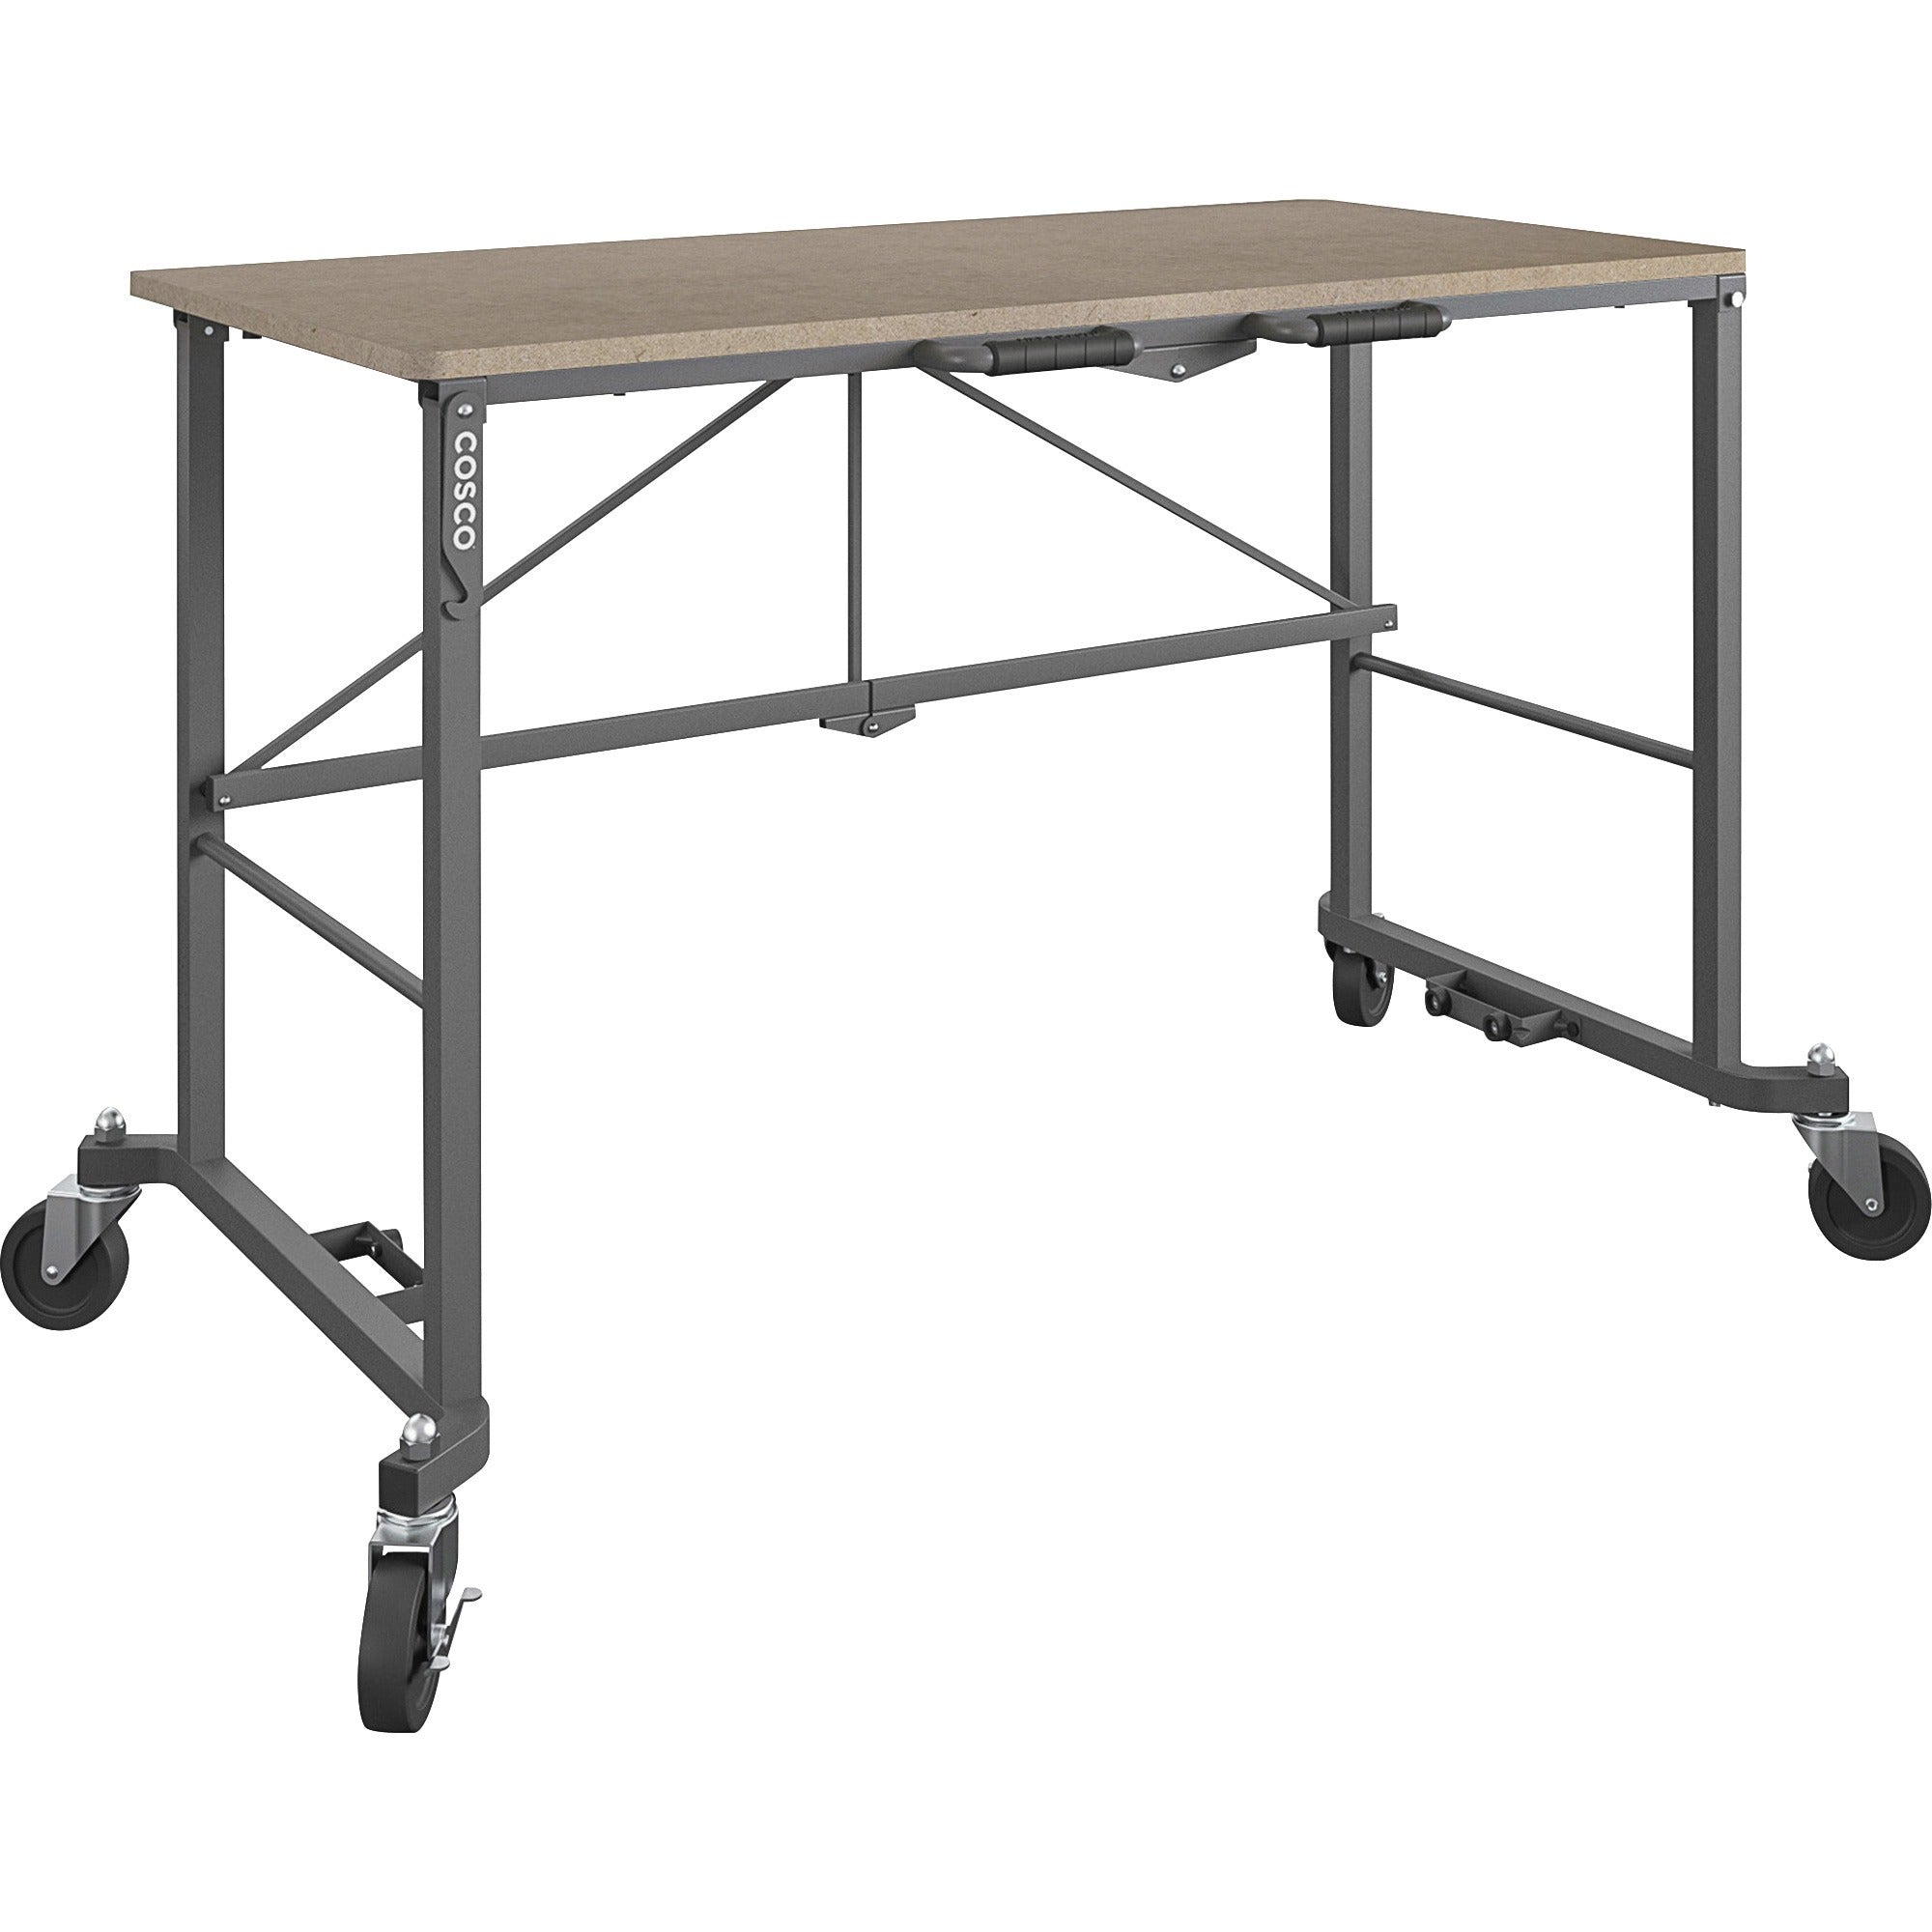 Cosco Smartfold Portable Work Desk Table - For - Table TopRectangle Top - Four Leg Base - 4 Legs - 350 lb Capacity x 51.40" Table Top Width x 26.50" Table Top Depth - 55.45" Height - Assembly Required - Brown - Steel - Medium Density Fiberboard (MDF) - 1